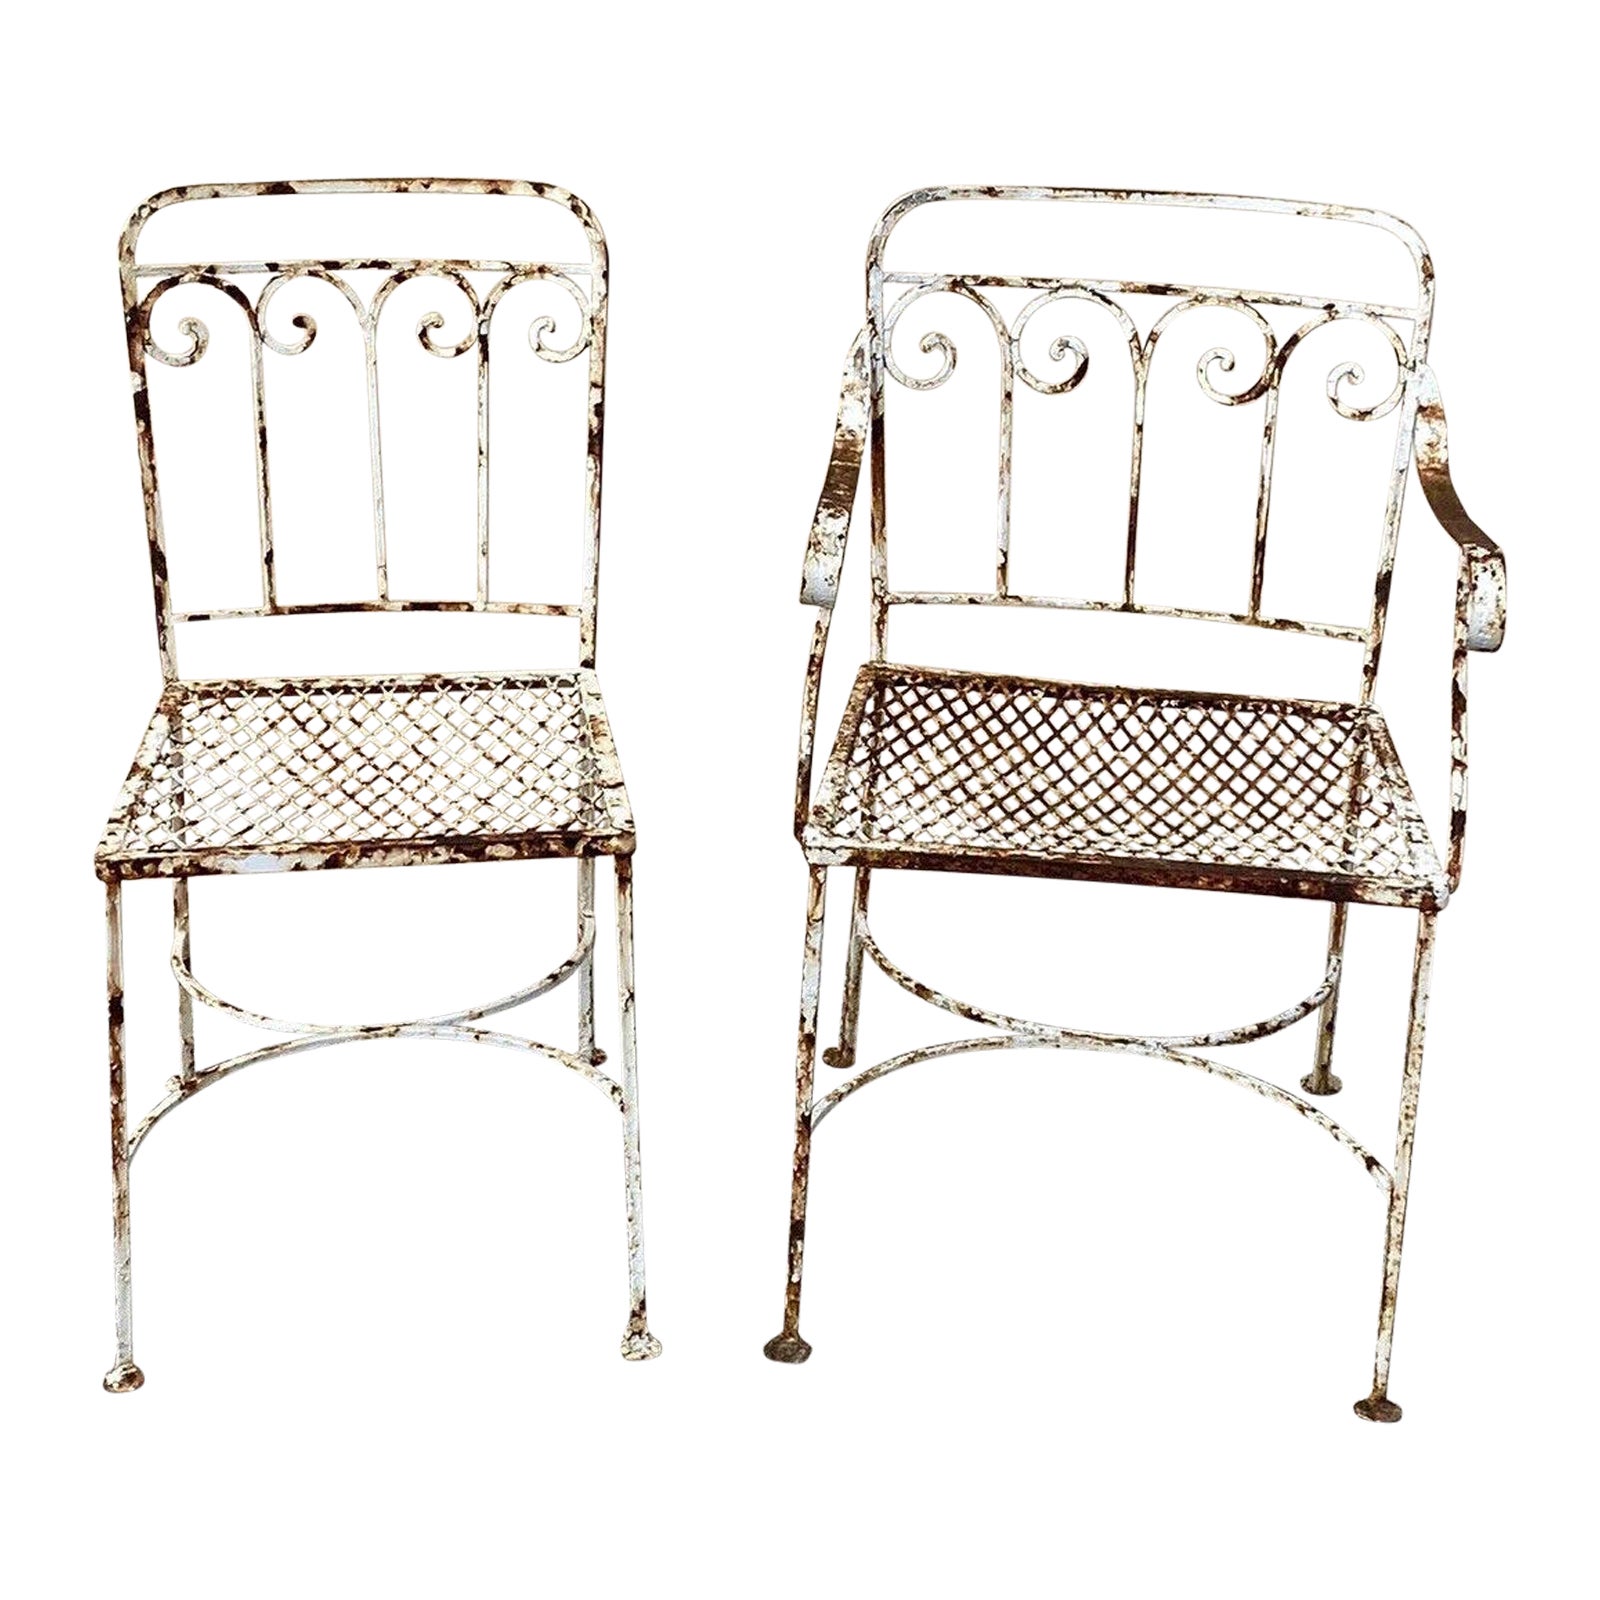 Antique Art Nouveau Scrolling Wrought Iron Garden Patio Dining Chairs - A Pair For Sale